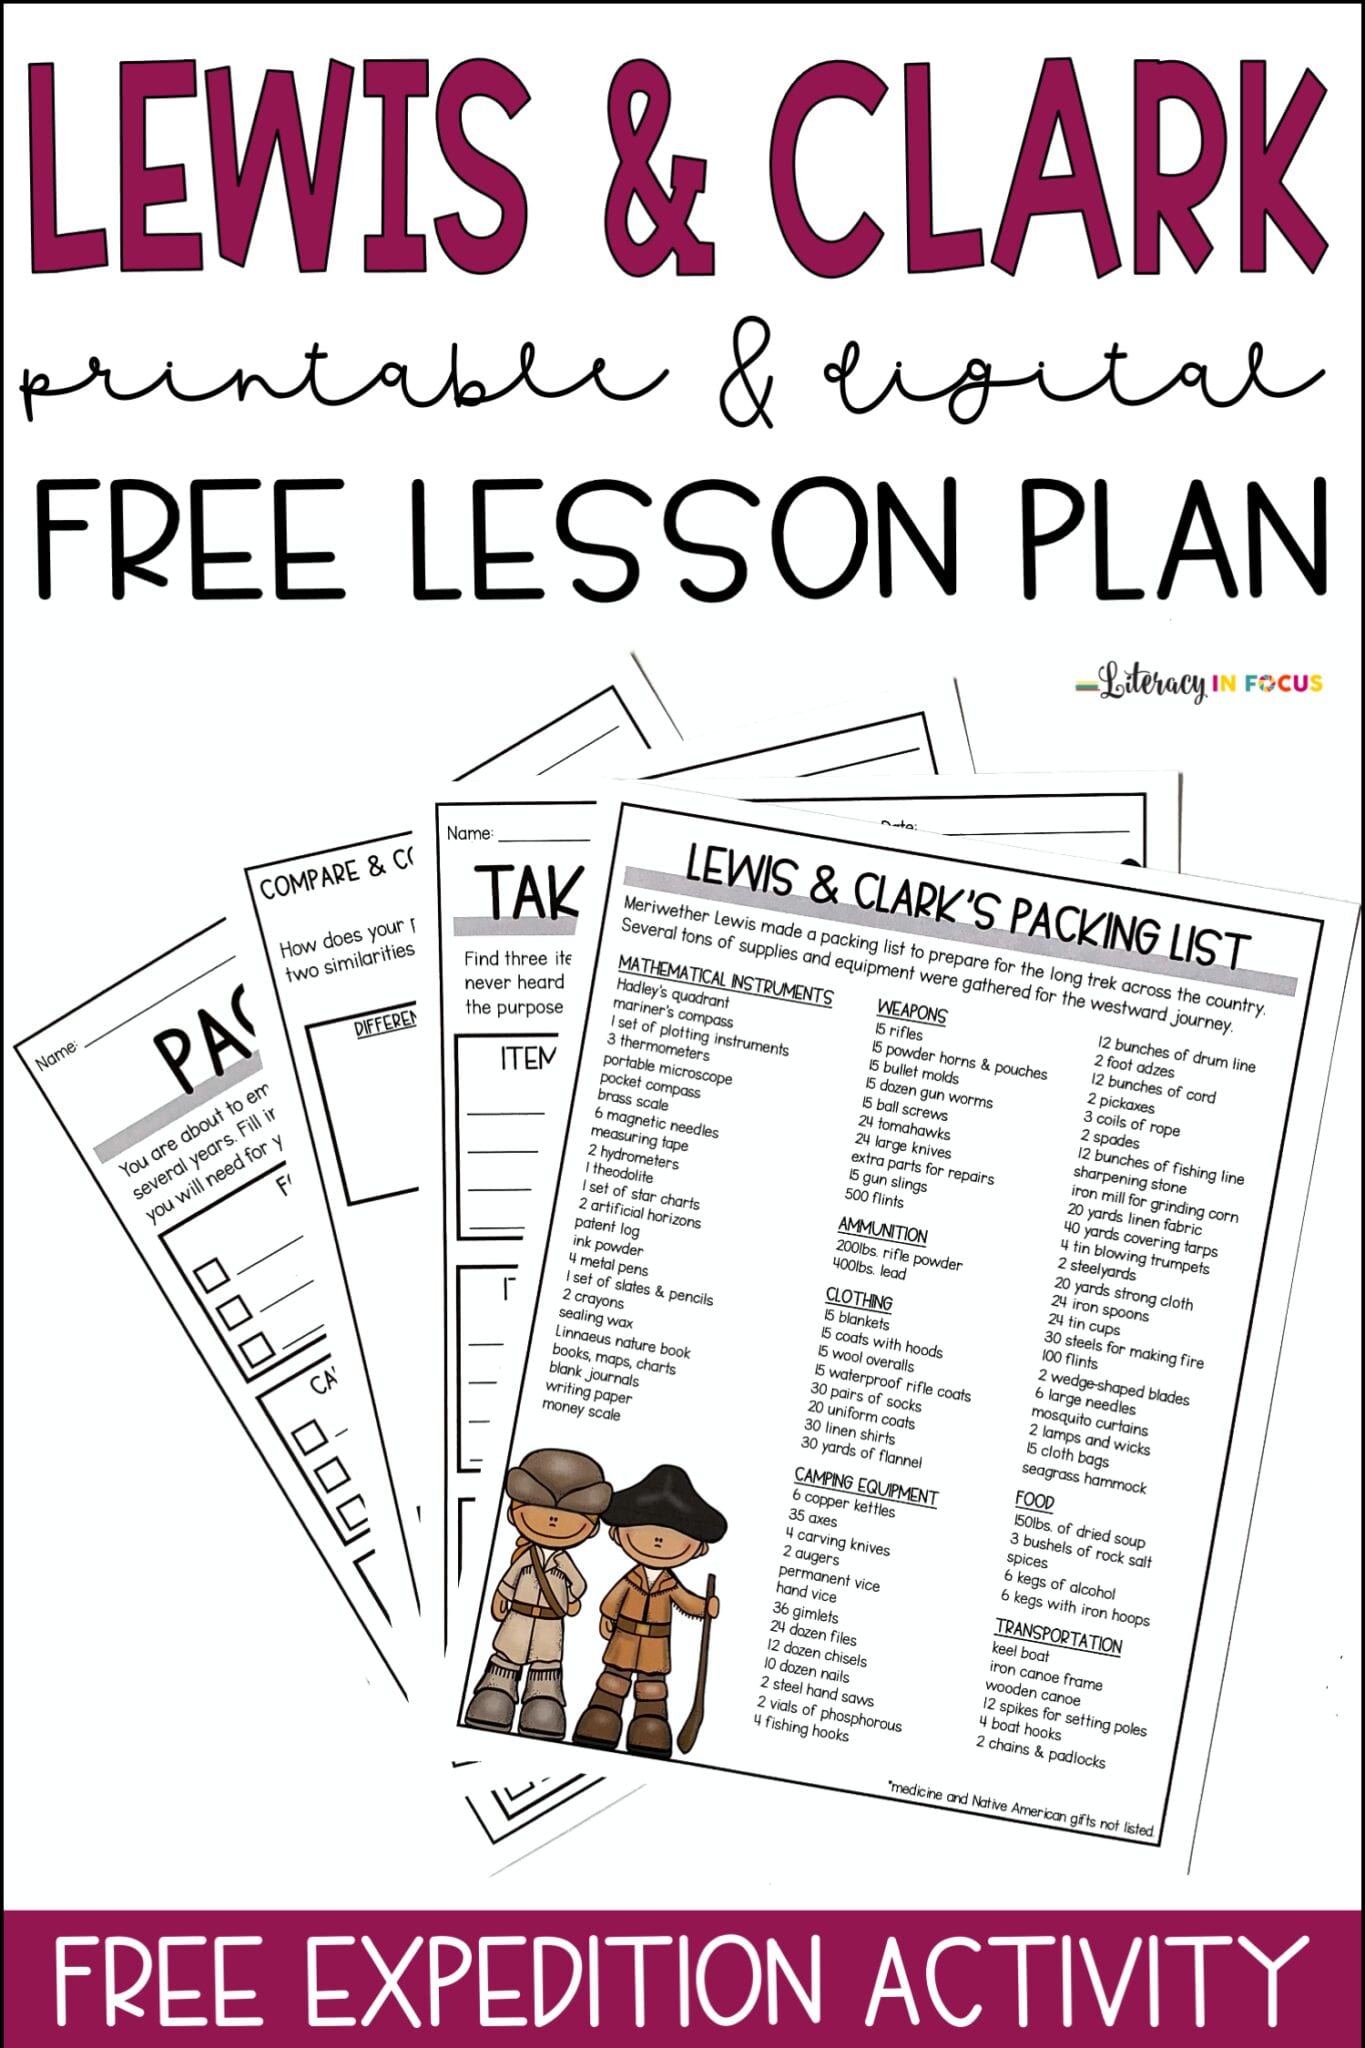 Lewis and Clark Expedition Intro Activity and Lesson Plan PDF